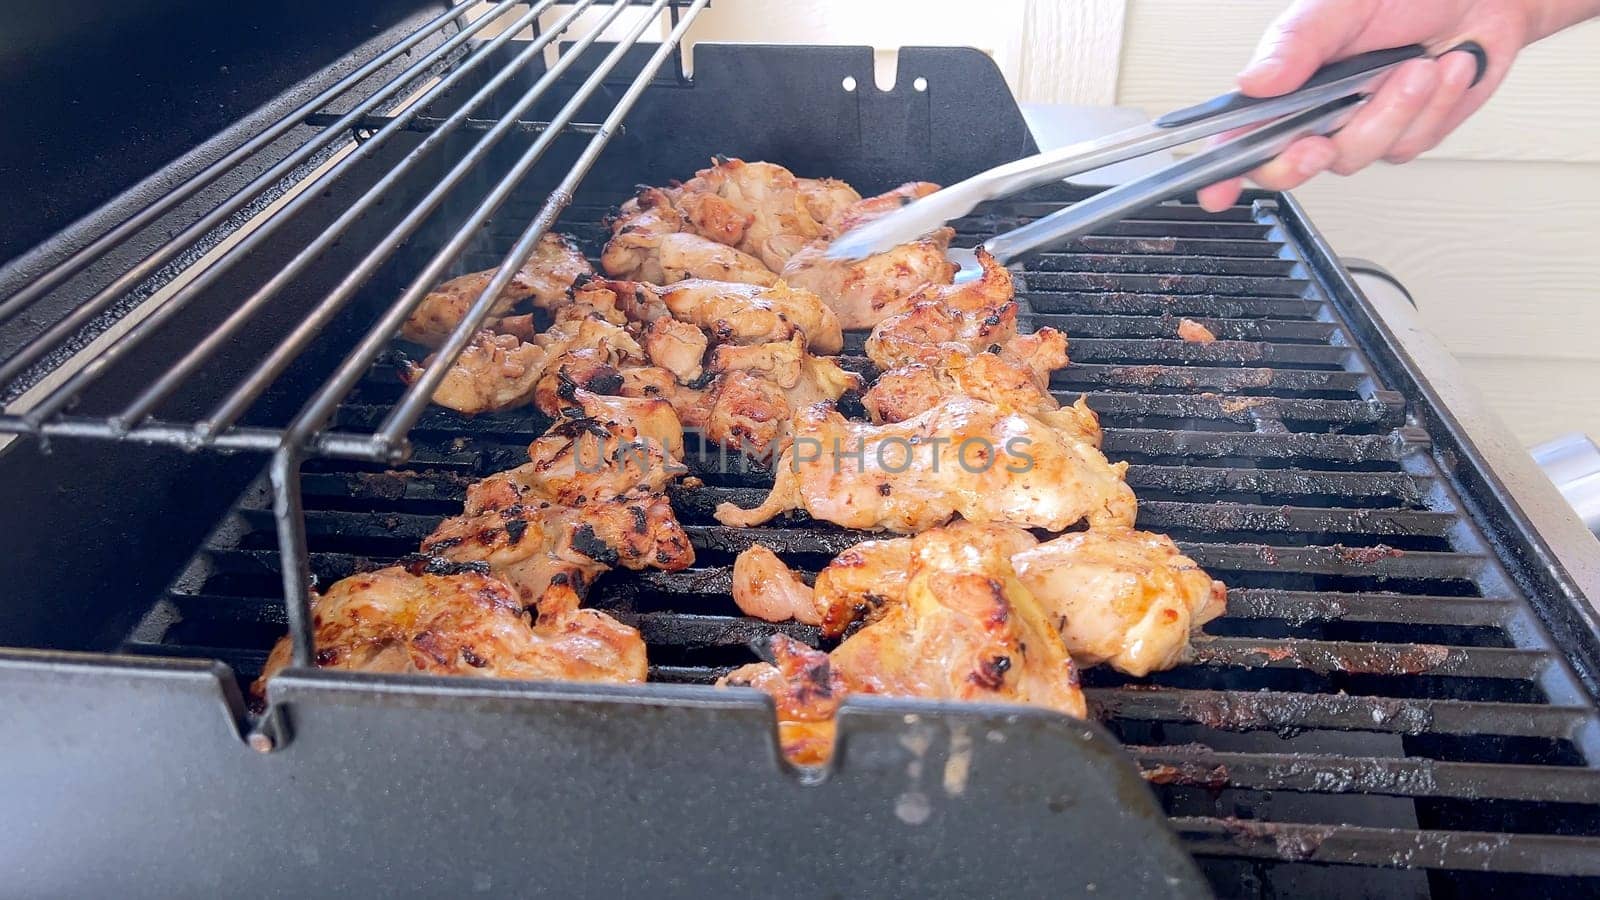 Grilling Marinated Chicken on an Outdoor BBQ Grill by arinahabich